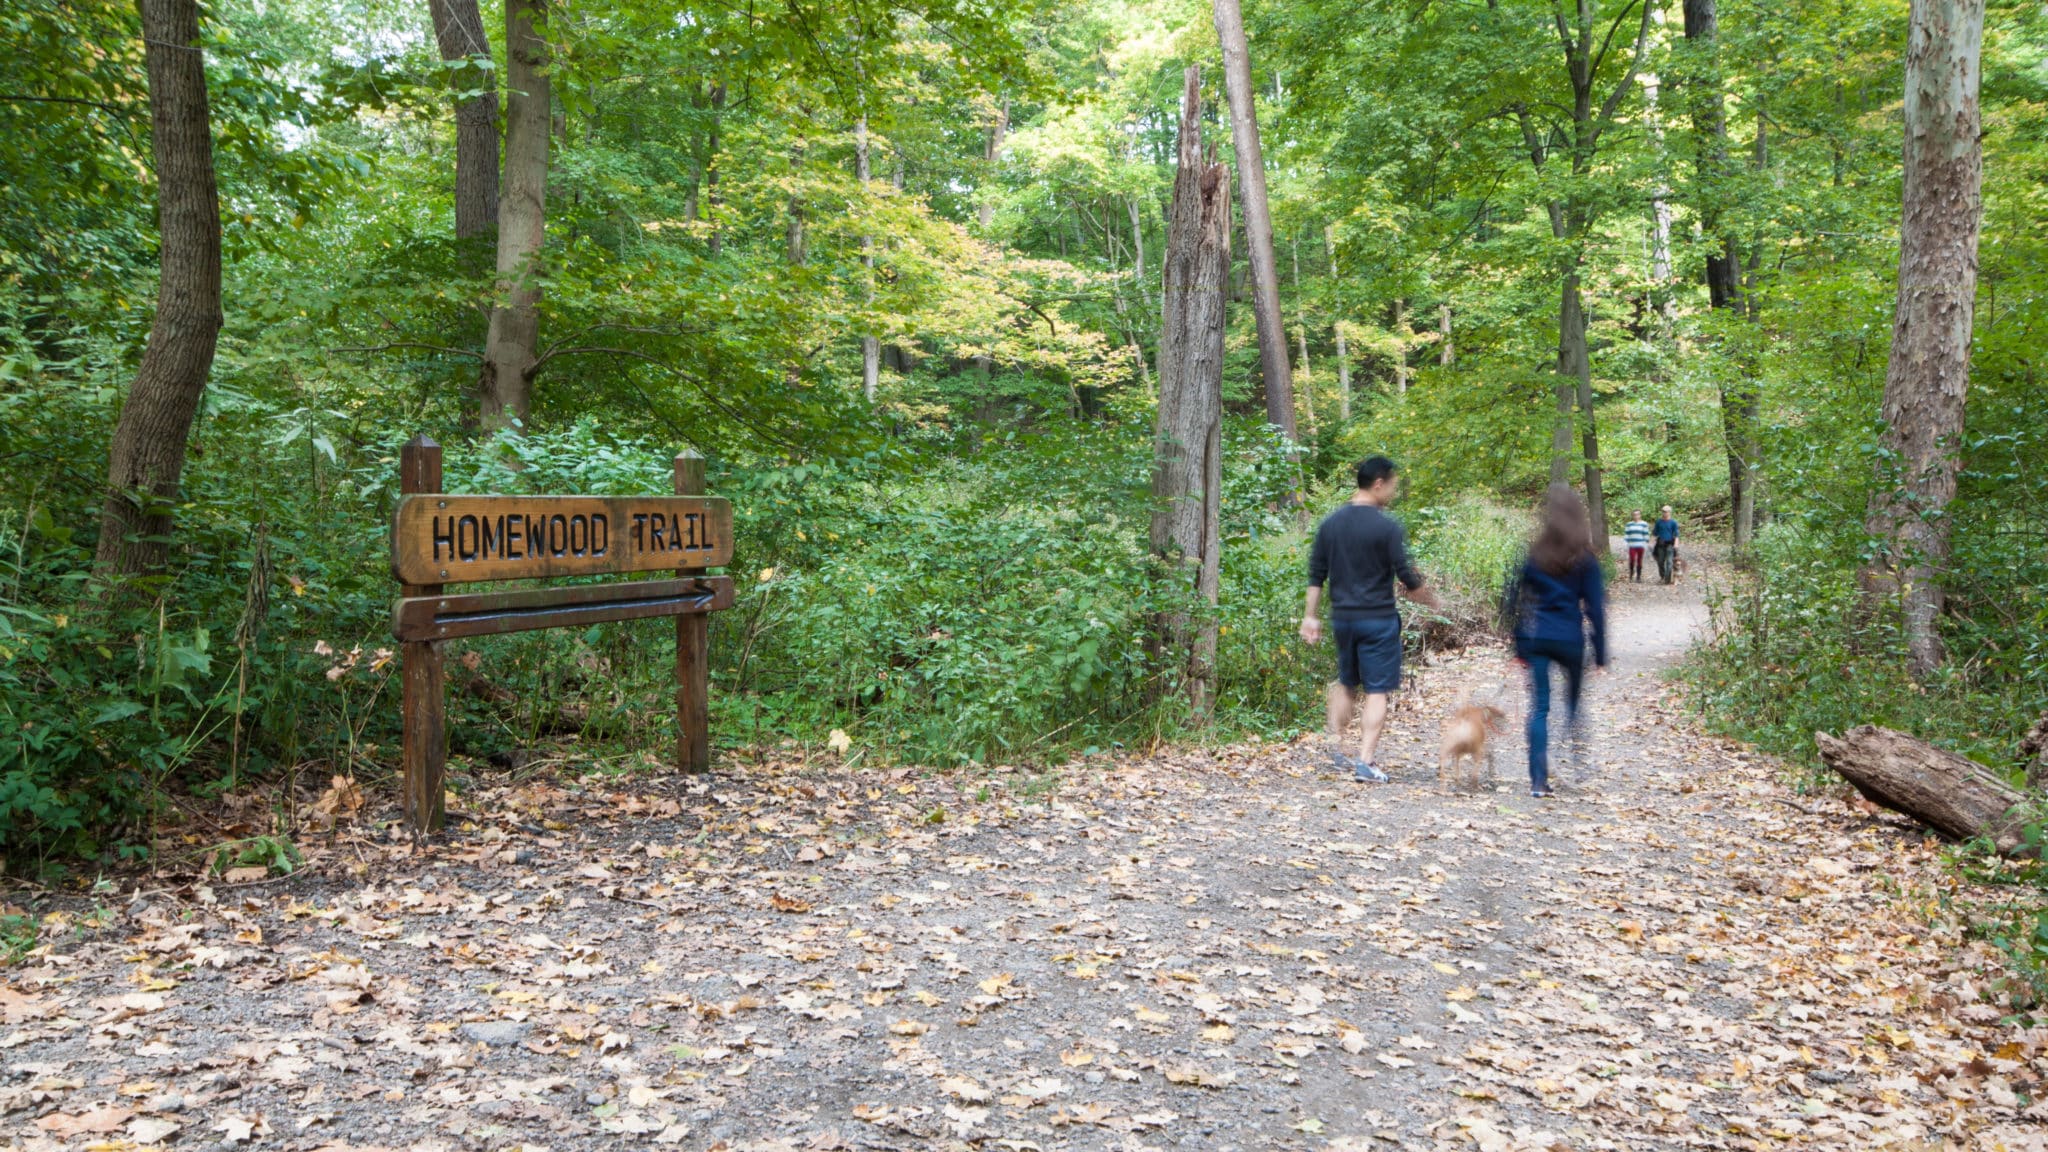 PPC Capital Projects 2015 Homewood Trail Signage Summer Fall Green Forest Leaves Walkers Dogs (Jeremy Marshall) HTL